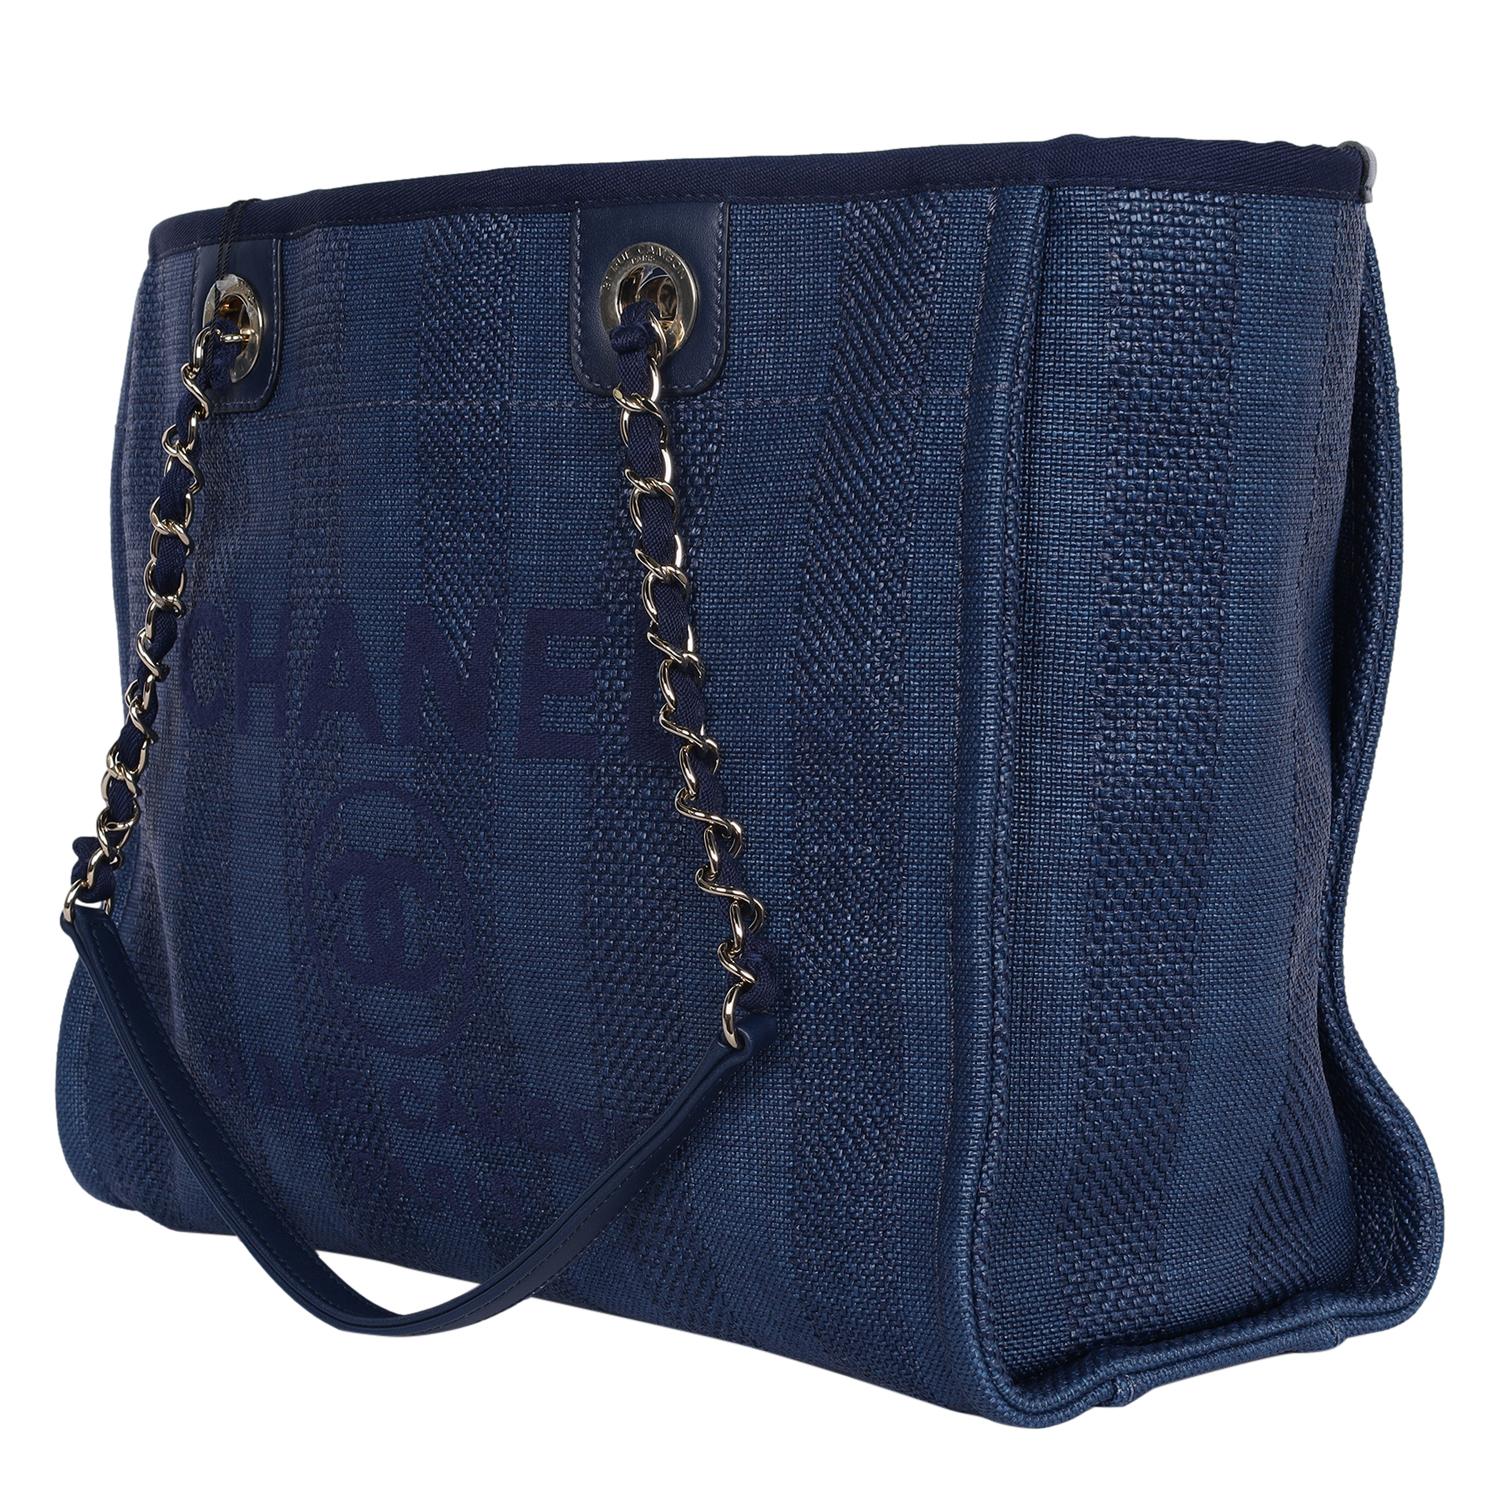 Chanel Blue Striped Mixed Fibers Medium Deauville Shoulder Bag Tote Navy 2019 For Sale 1